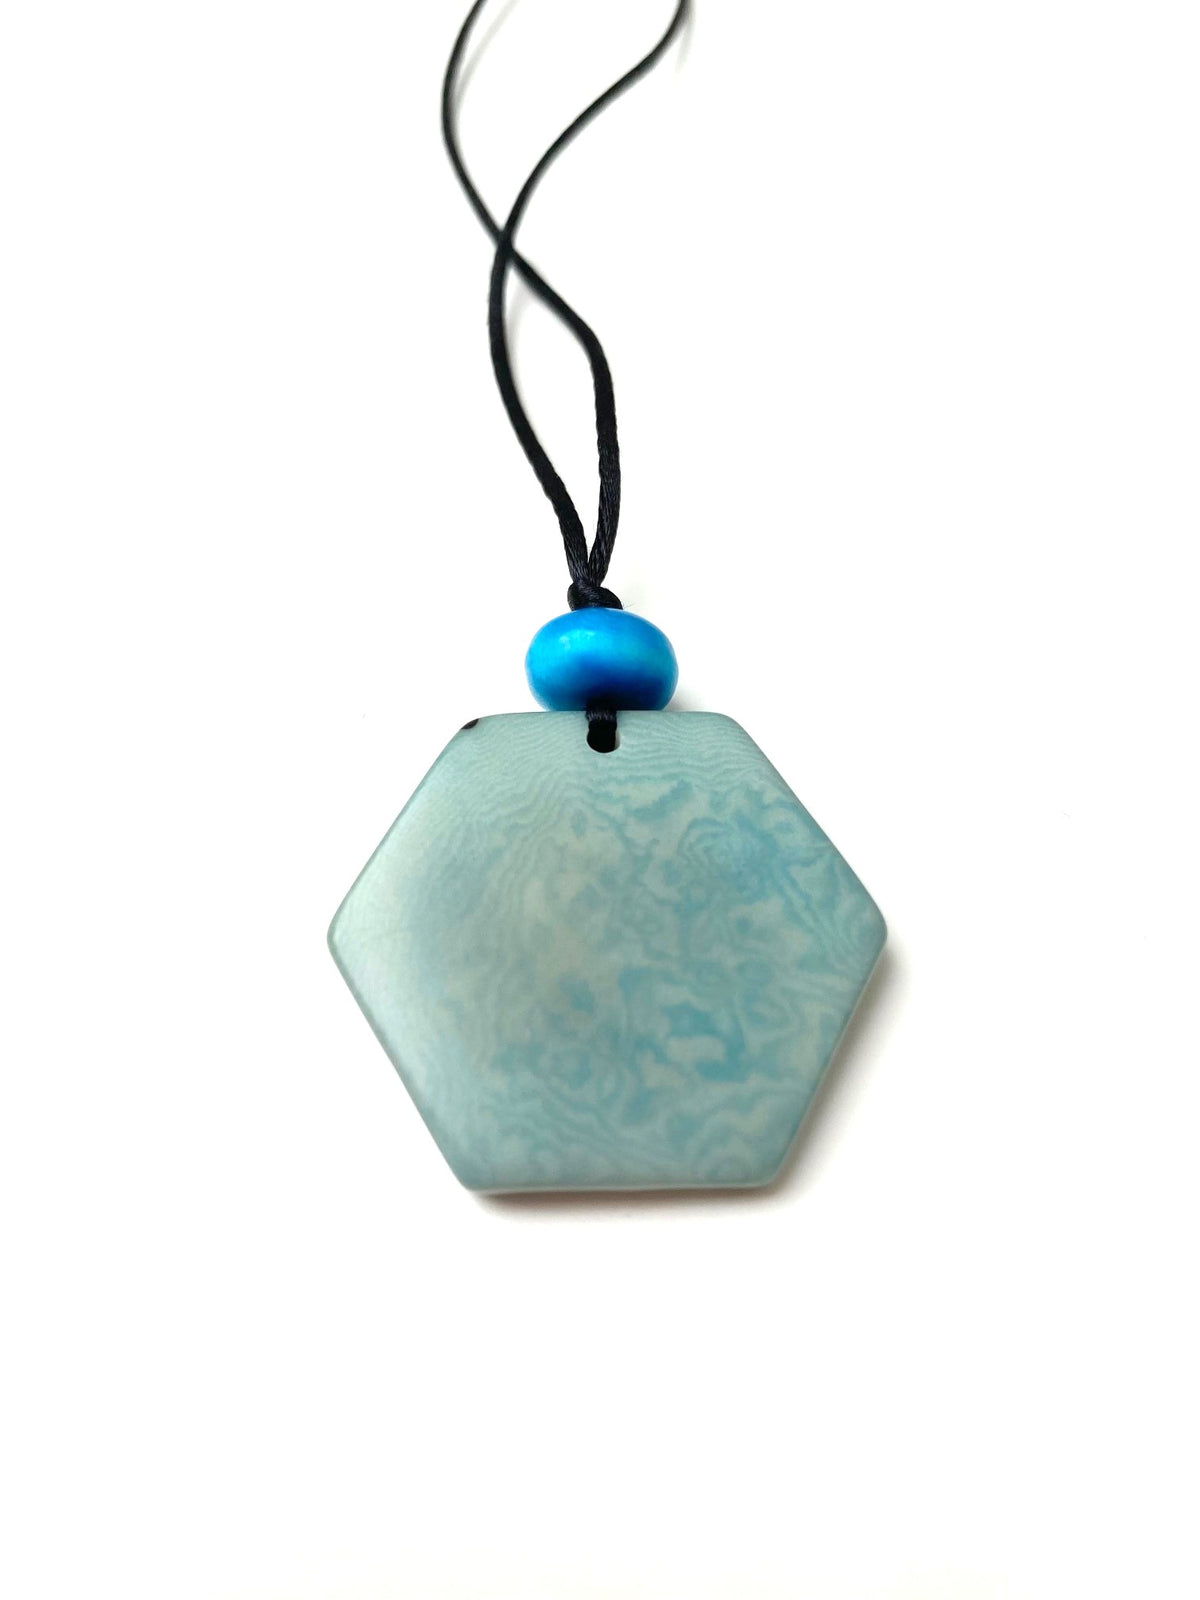 Hexagon pendant necklace - Blue Sky with Turquoise